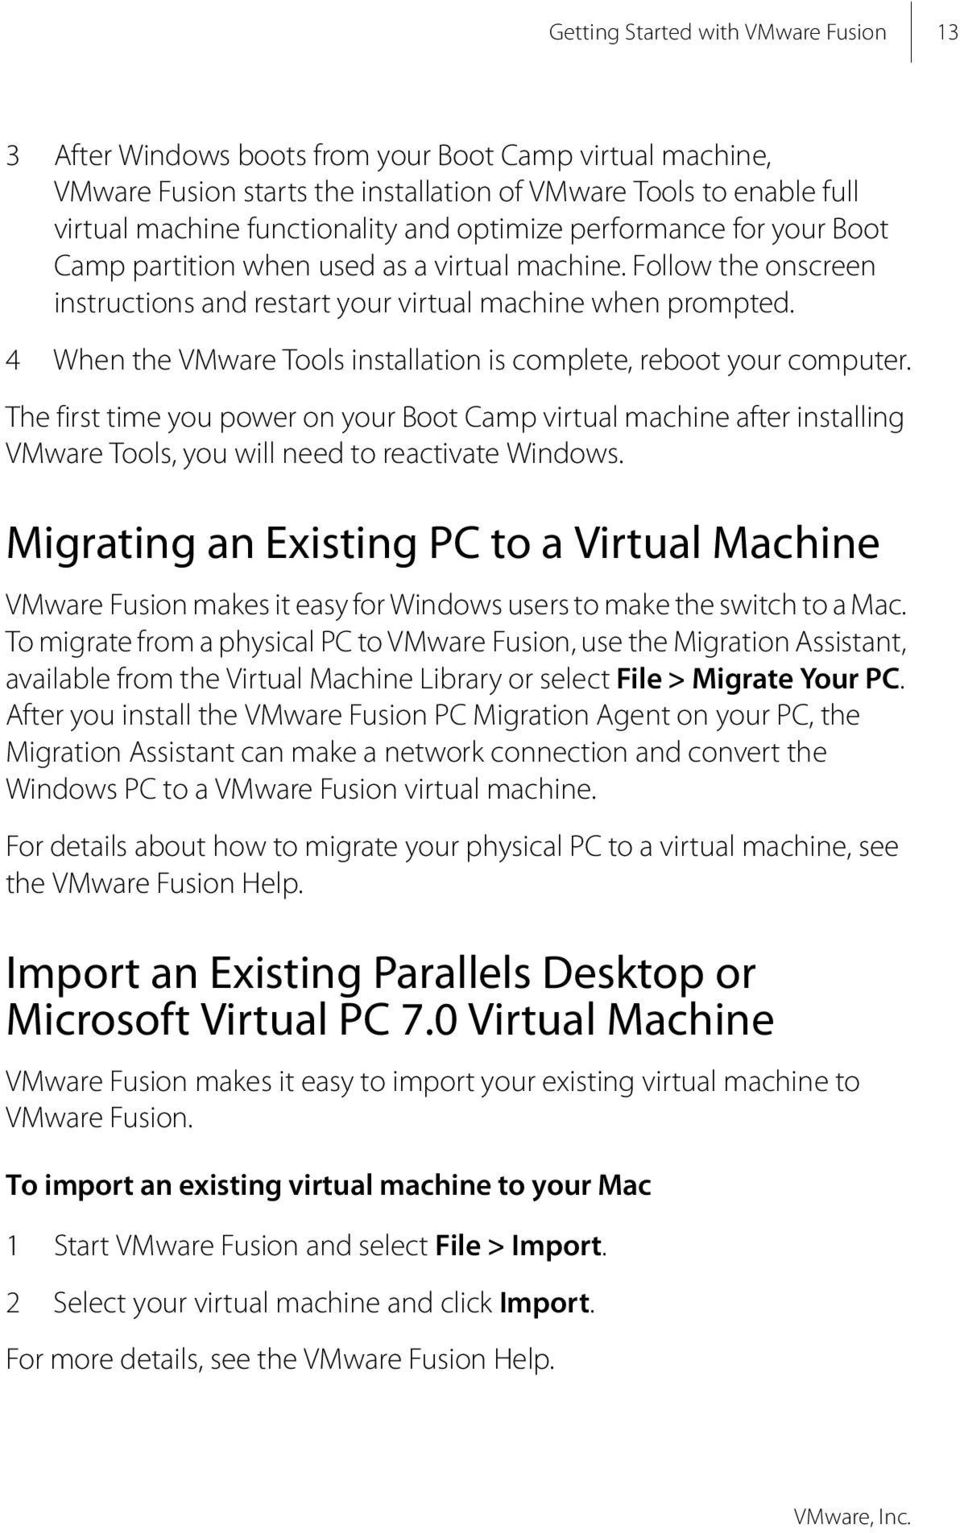 4 When the VMware Tools installation is complete, reboot your computer. The first time you power on your Boot Camp virtual machine after installing VMware Tools, you will need to reactivate Windows.